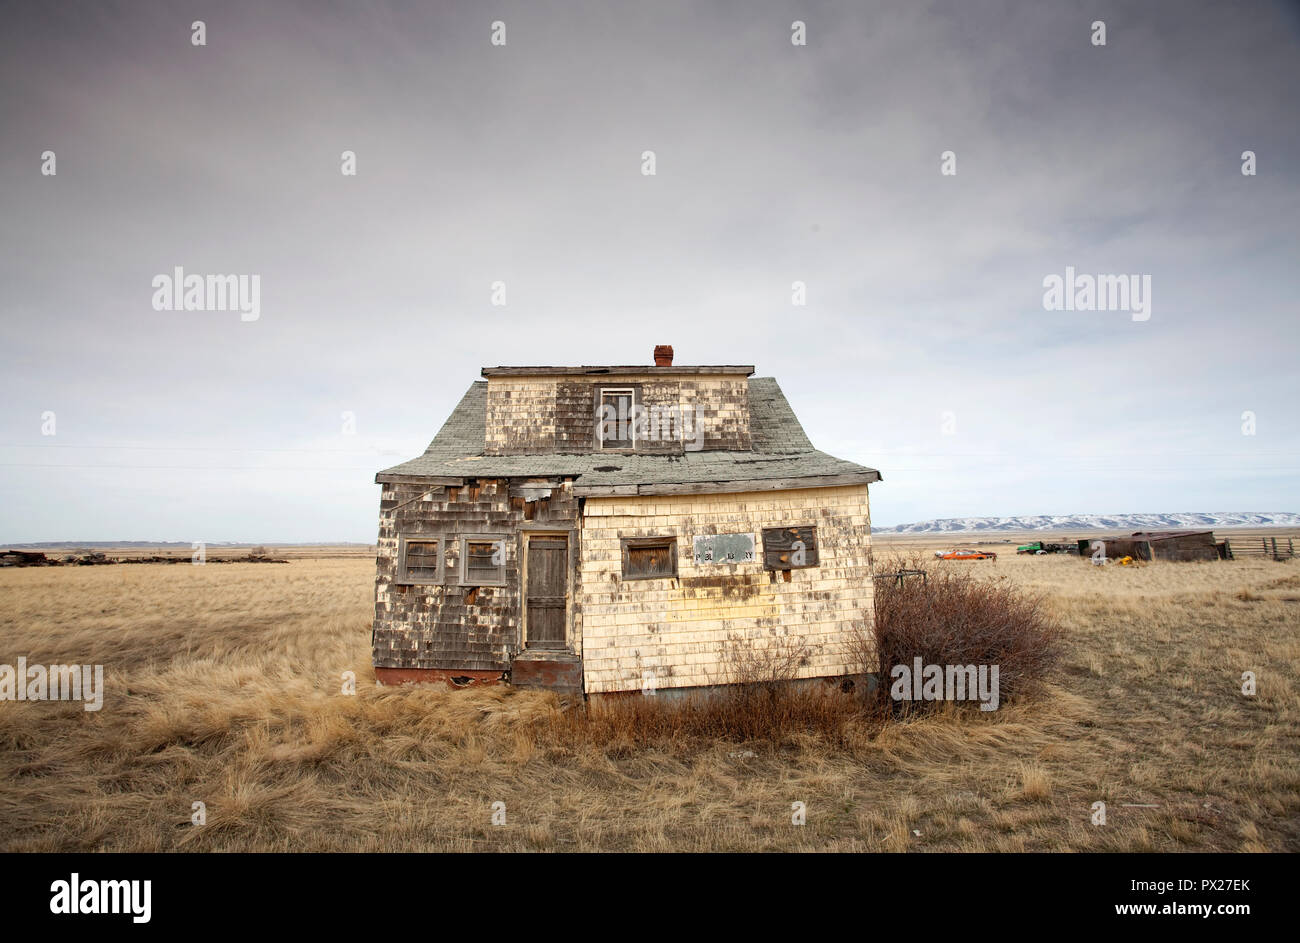 Abandoned public library in Wyoming, USA Stock Photo